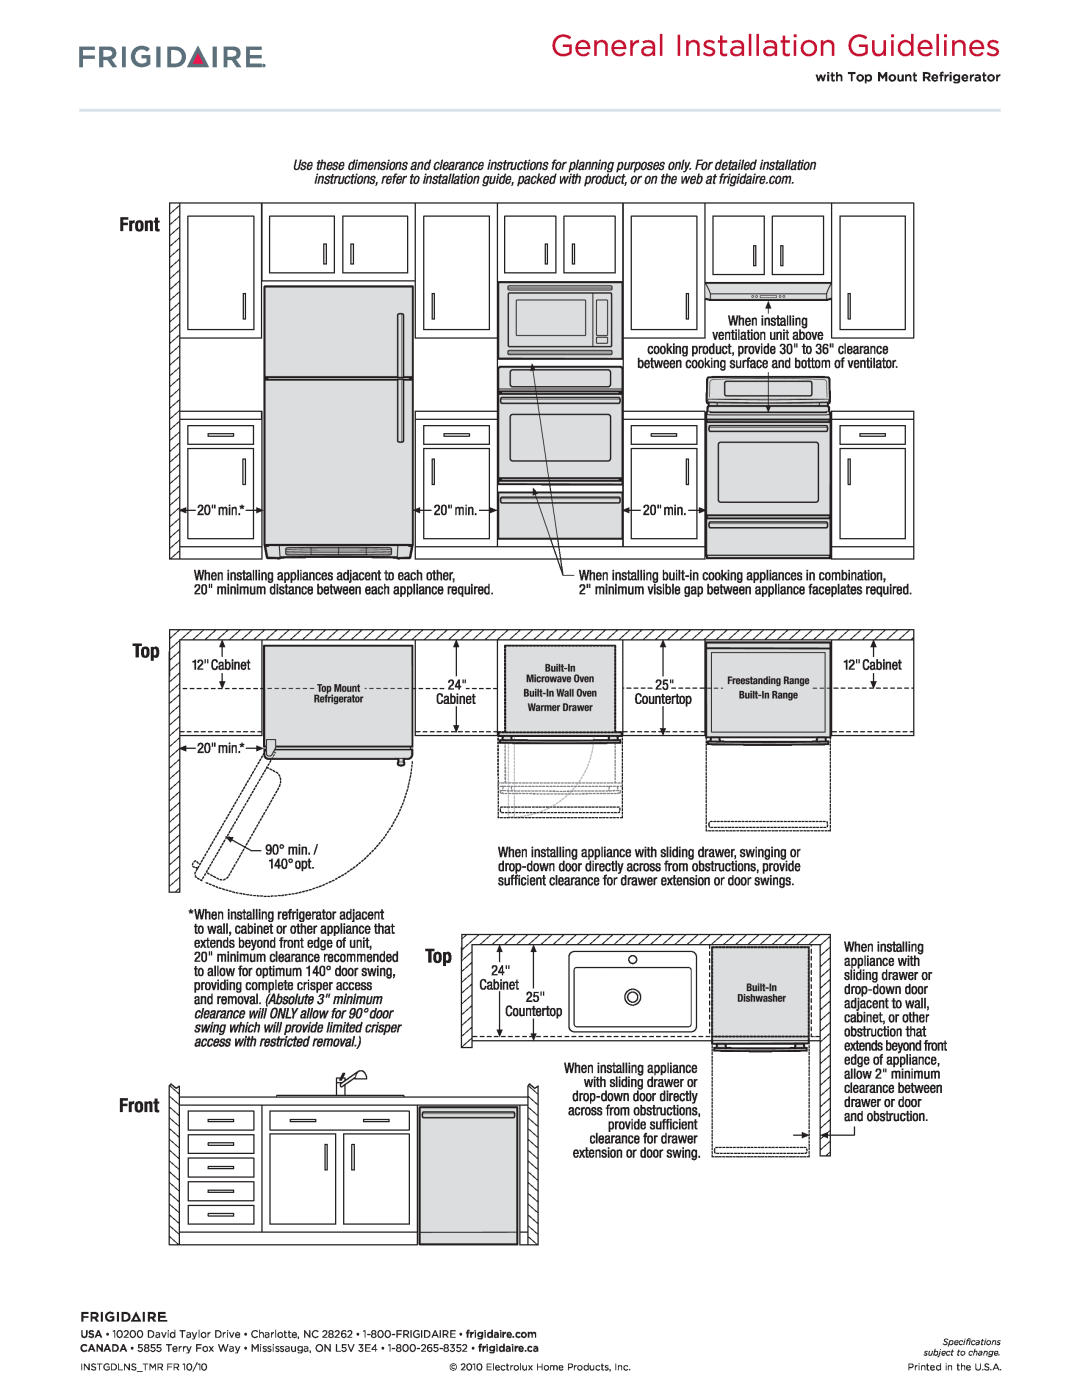 Frigidaire FGEF3077K W/B General Installation Guidelines, Top Front, with Top Mount Refrigerator, INSTGDLNS TMR FR 10/10 